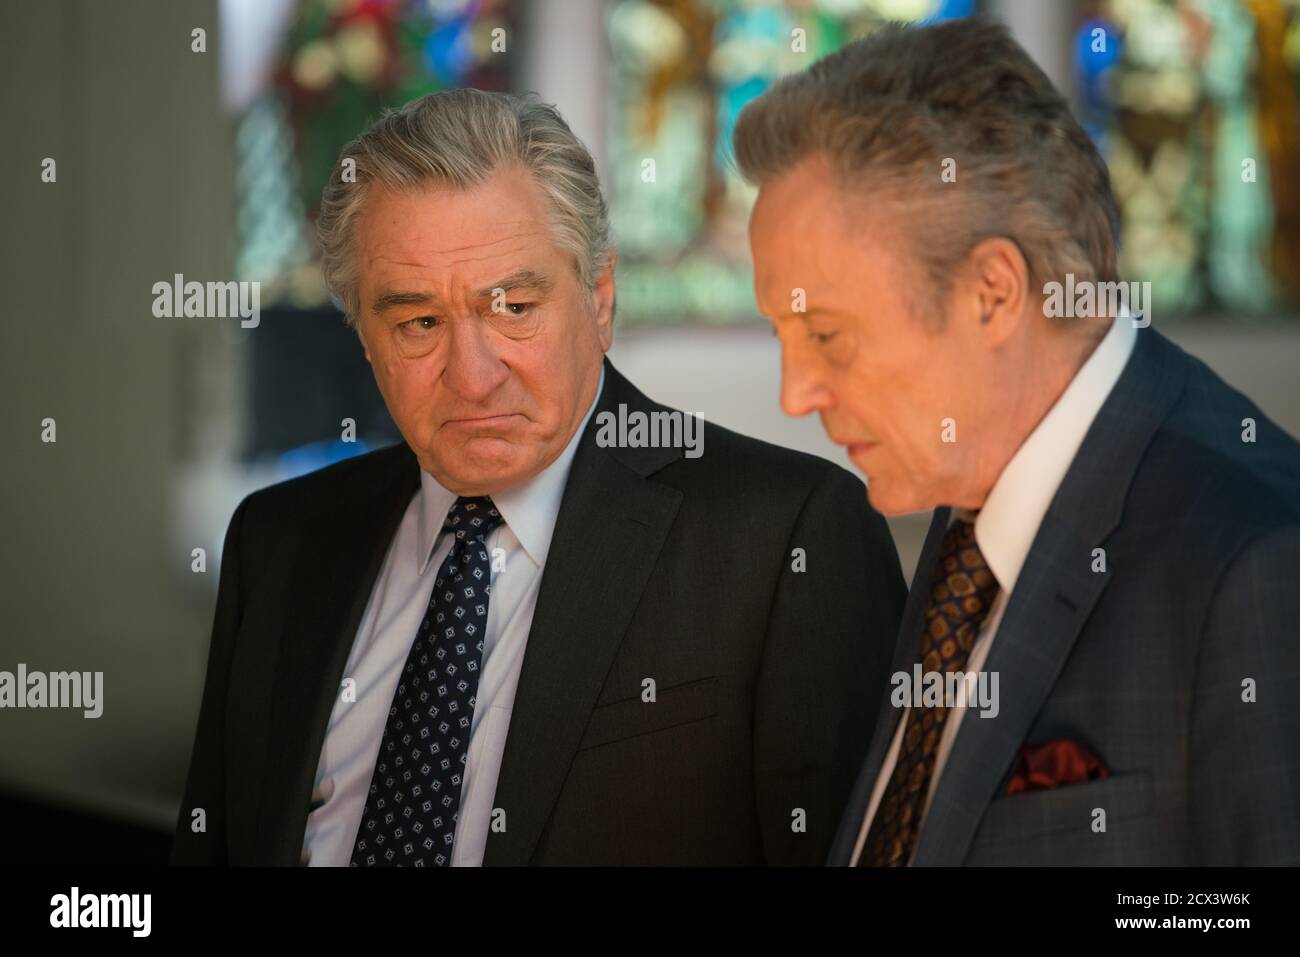 USA. Robert De Niro and Christopher Walken in the ©101 Studios new film:  War with Grandpa (2020). Plot: Upset that he has to share the room he loves  with his grandfather, Peter